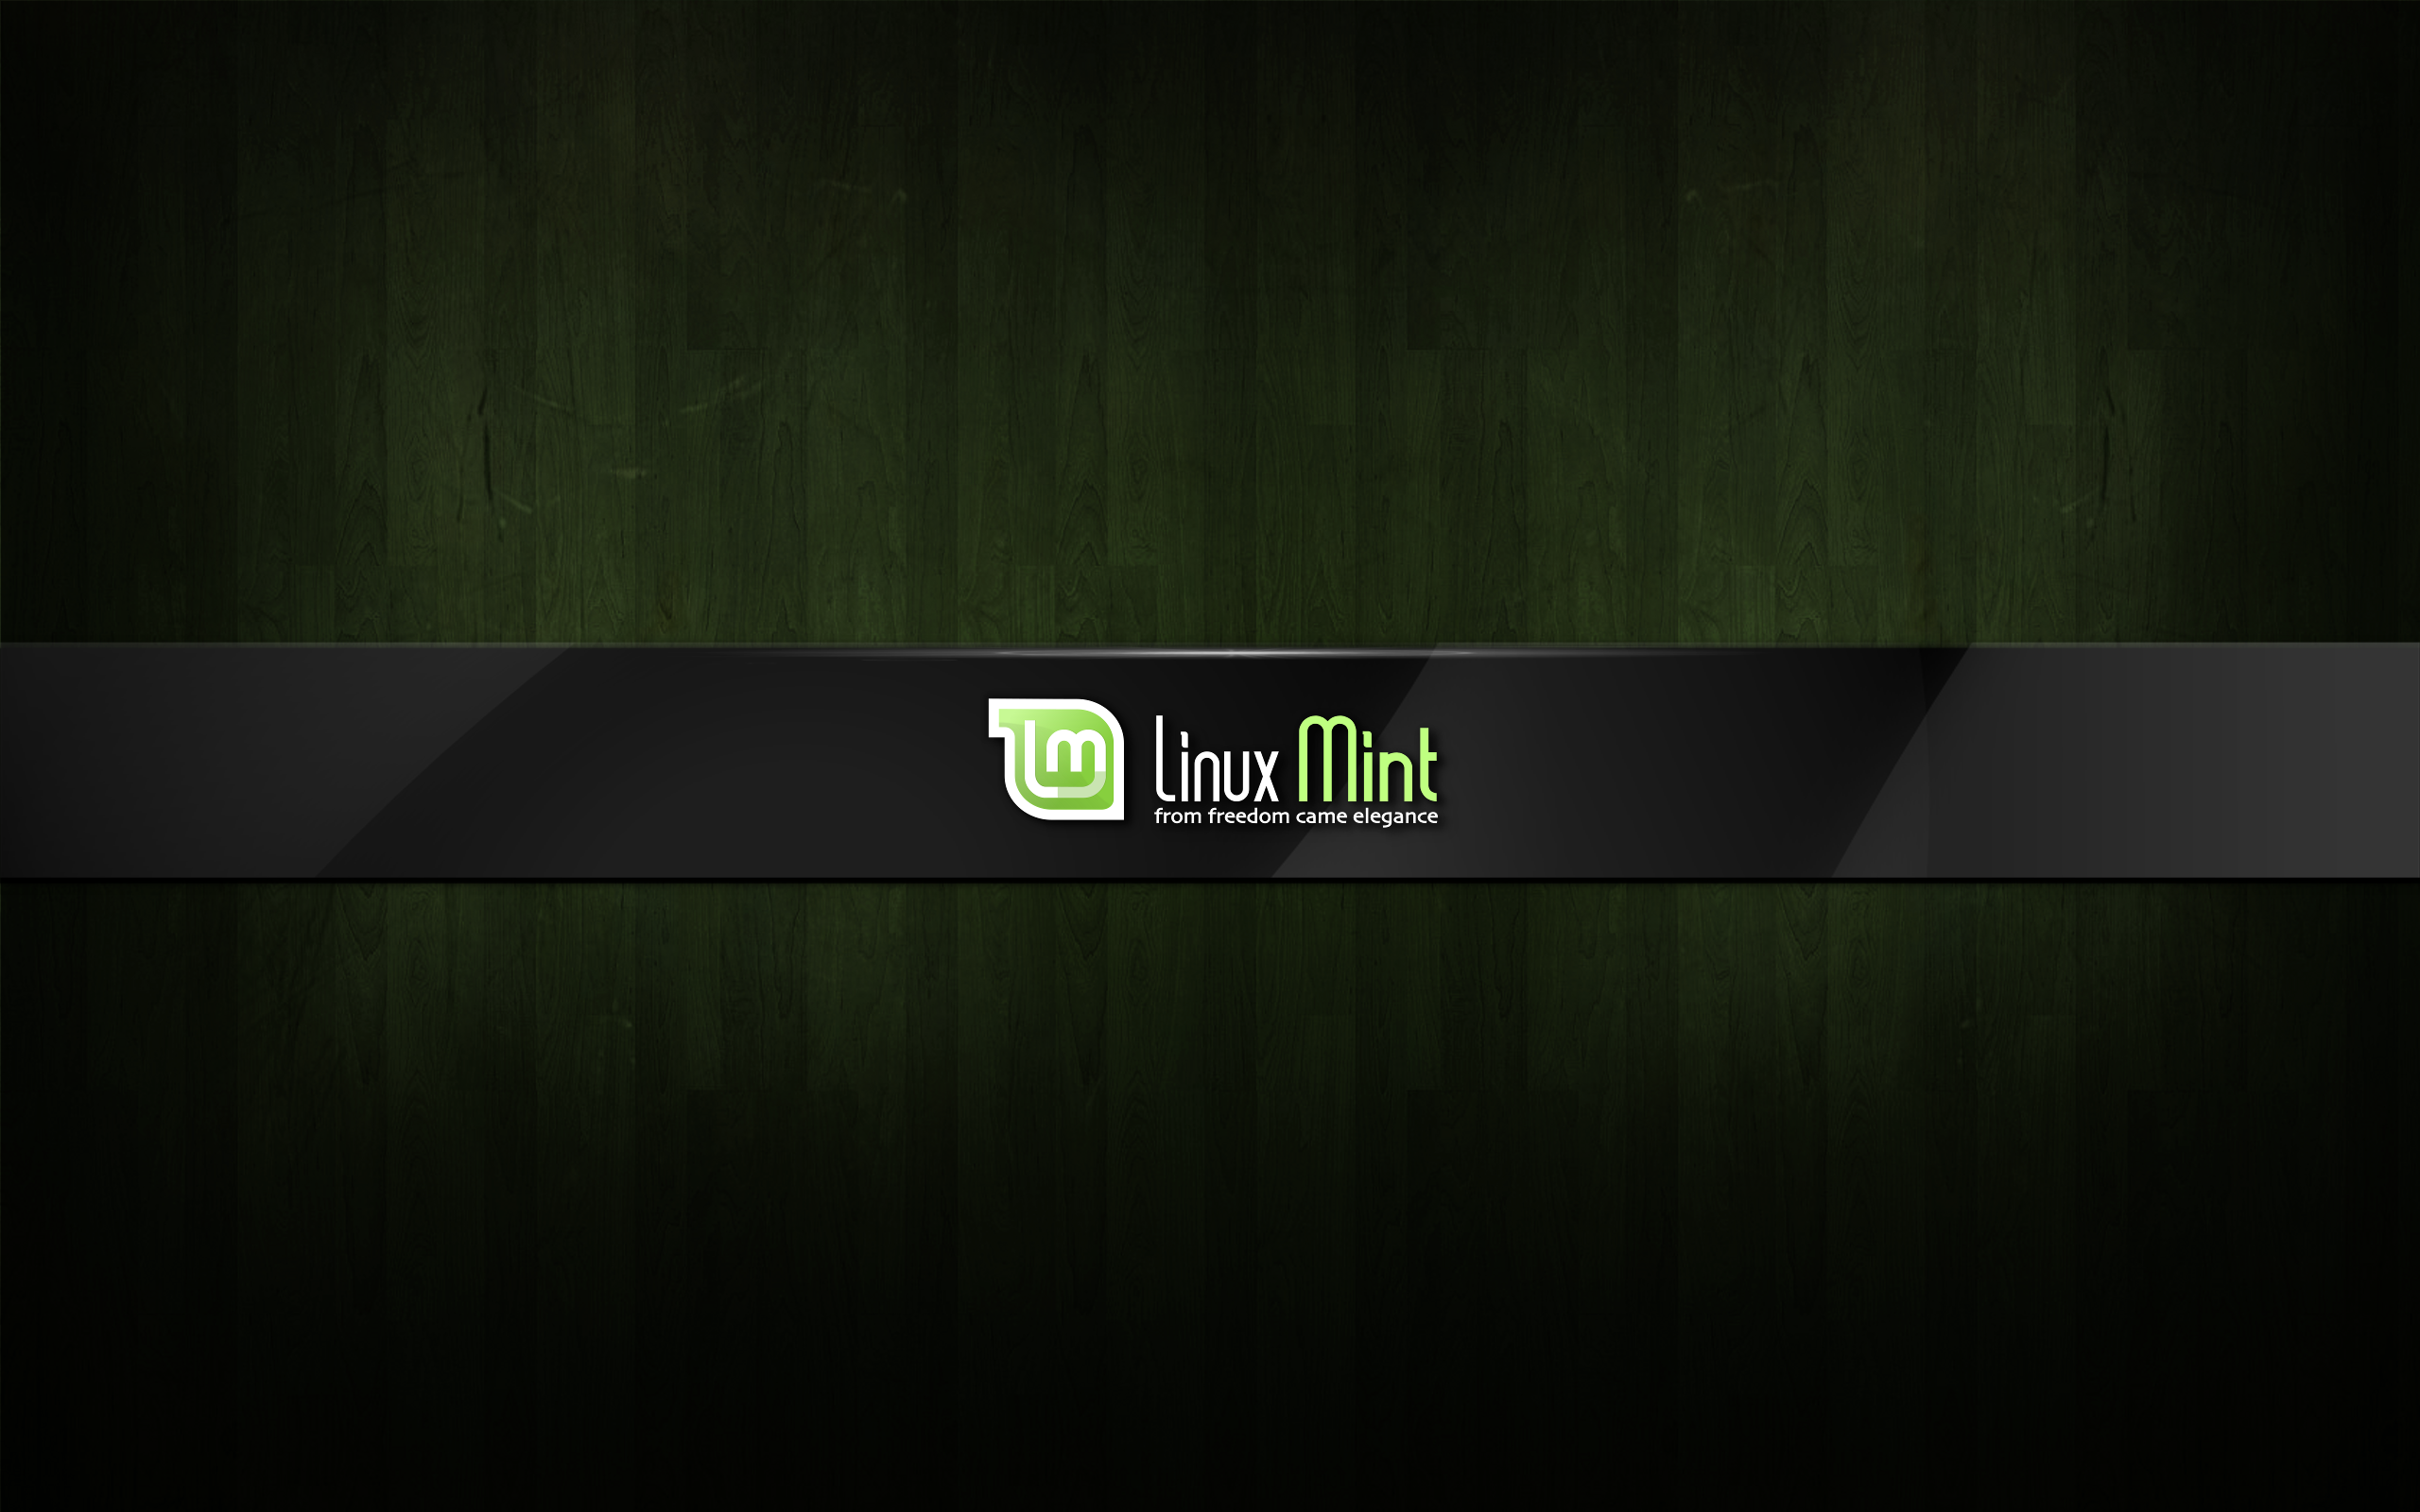 Linux mint 171 Awesome Wallpapers